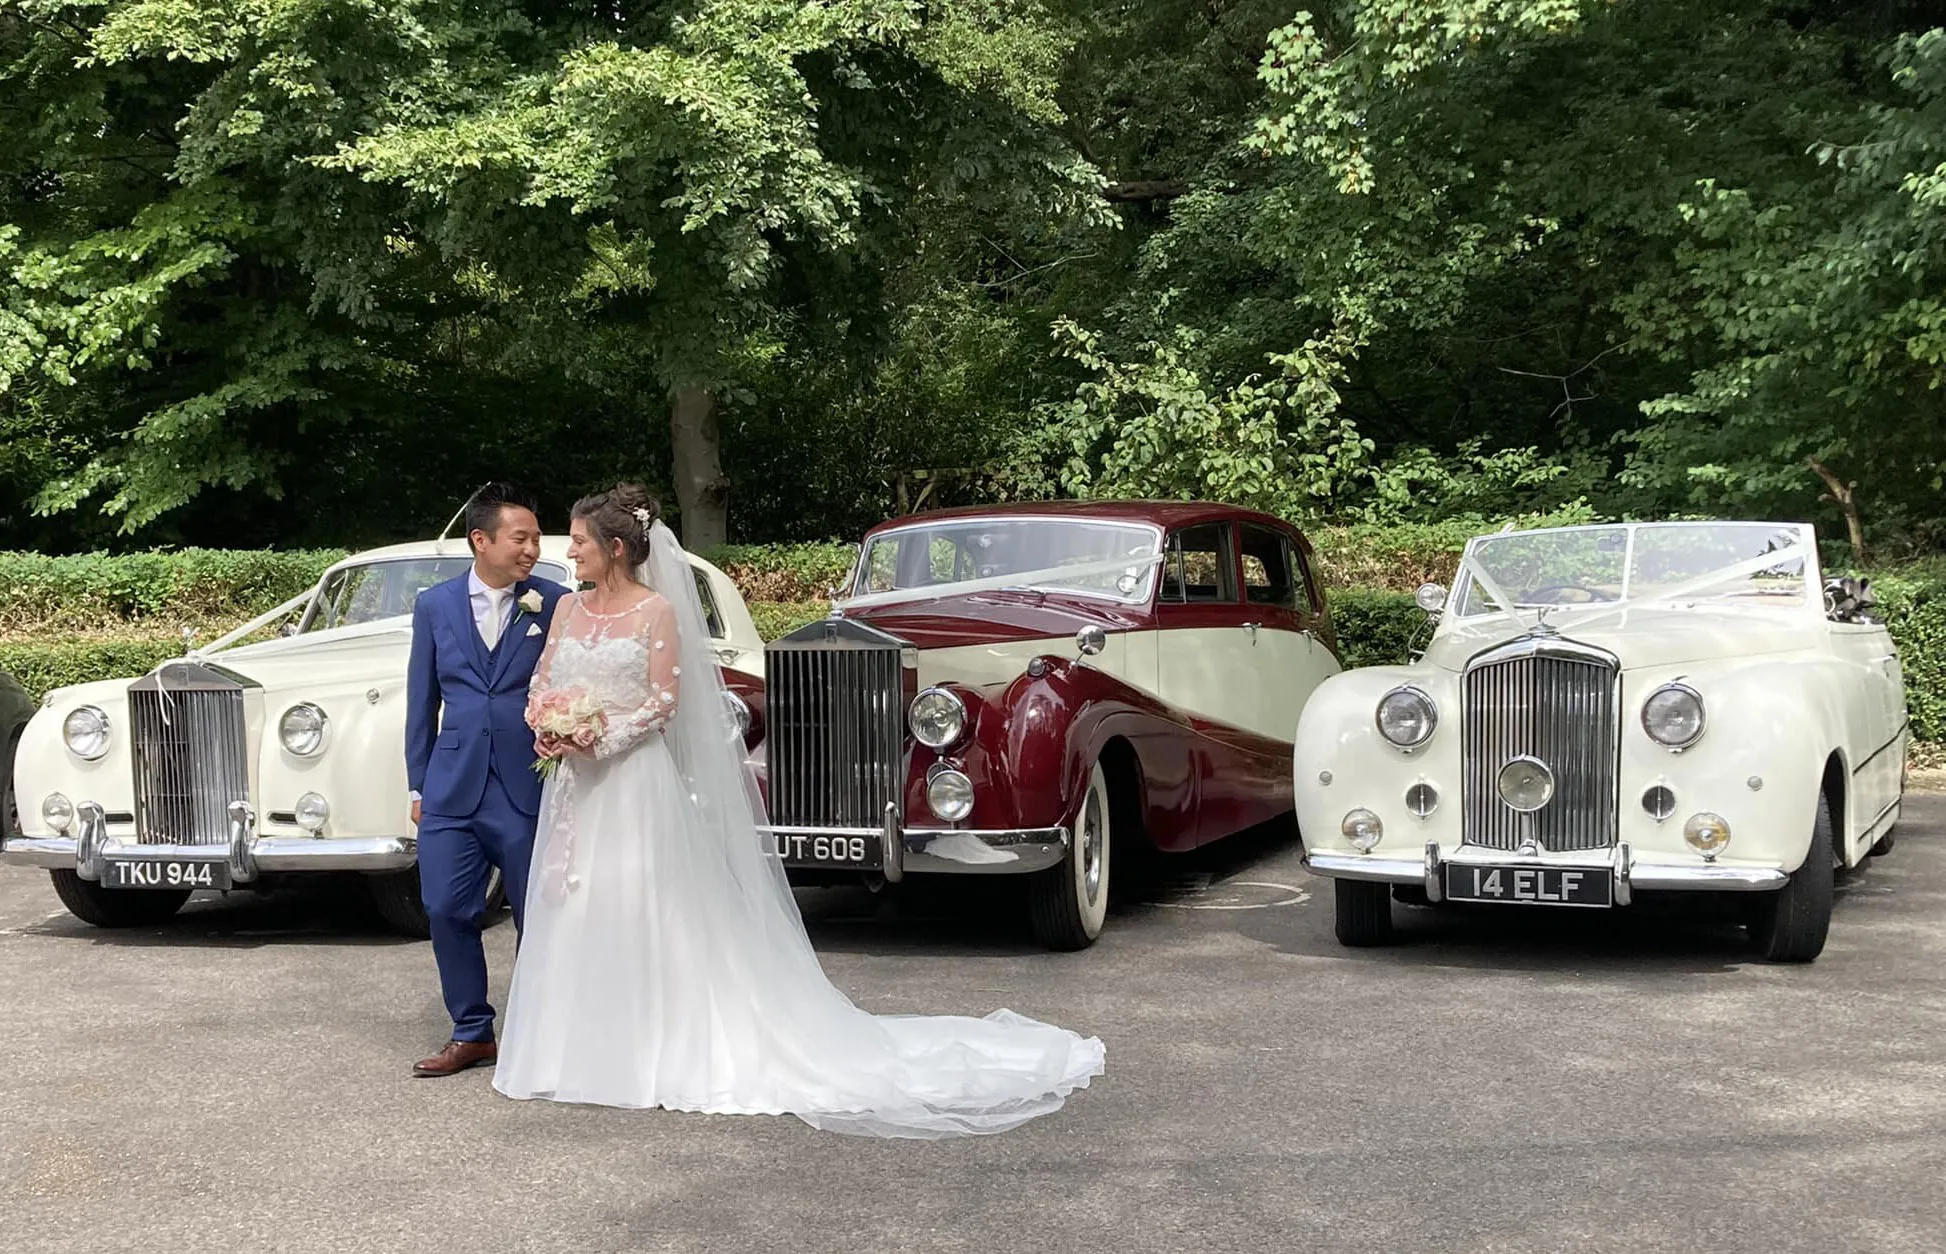 Three Classic and Vintage Wedding Cars at a wedding venue with Bride and Groom standing in front of the vehicles. Each vehicles are decorated with Matching White Ribbons